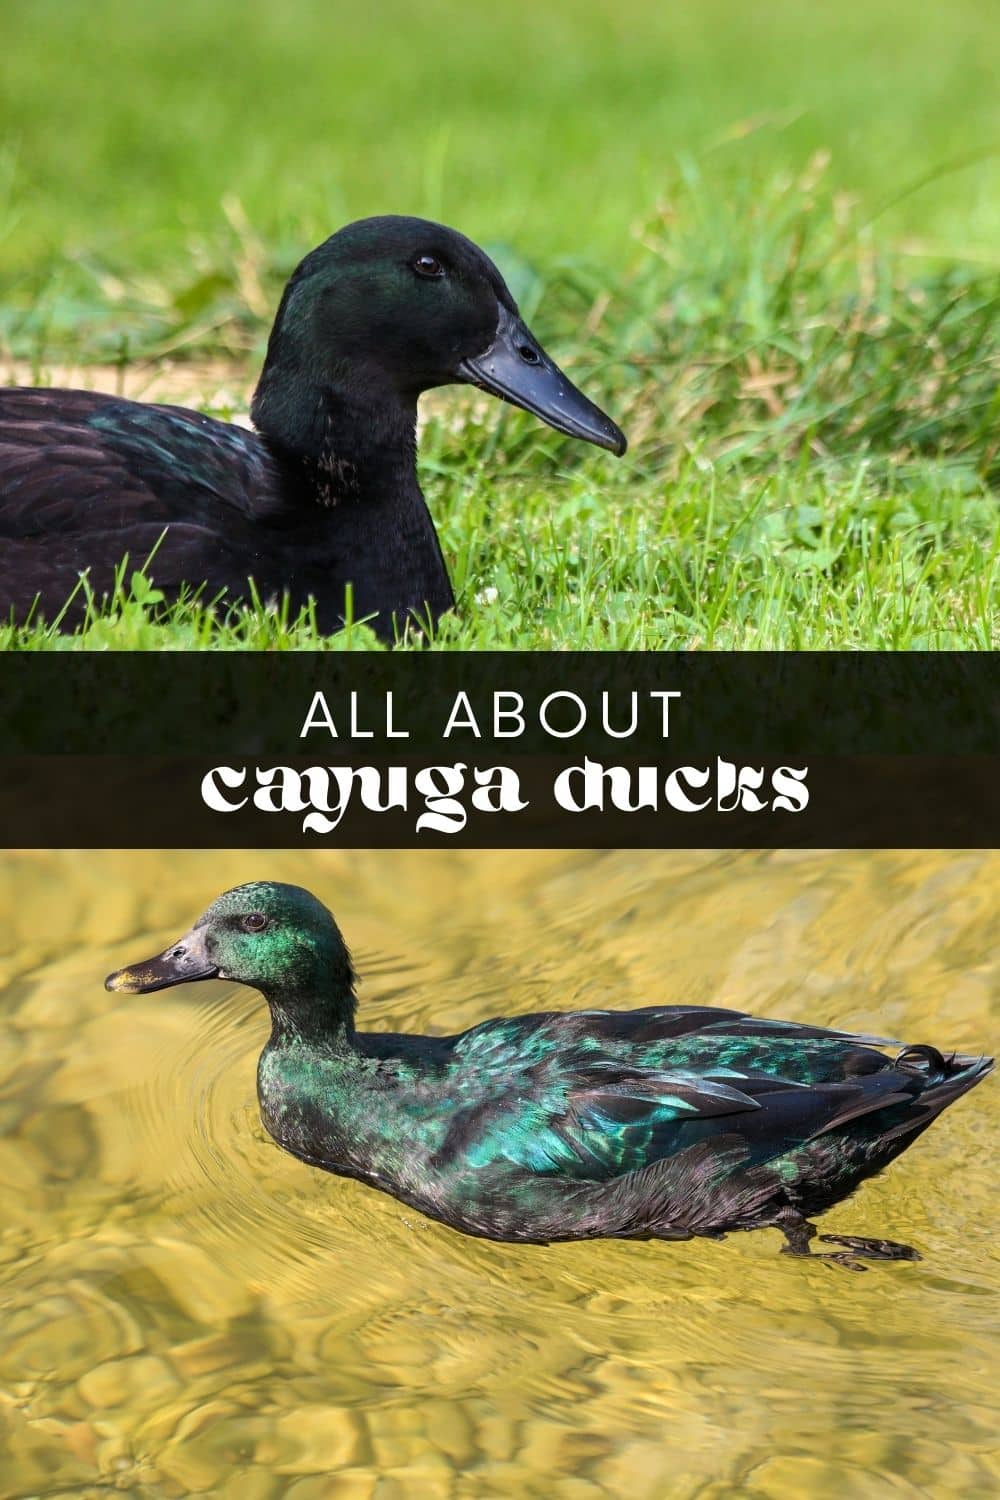 Are you looking for a friendly, medium-sized duck to add to your flock? With their striking appearance and uniquely colored eggs, you can't go wrong with a Cayuga duck! Learn more about these beautiful birds and how to care for them in this comprehensive guide.